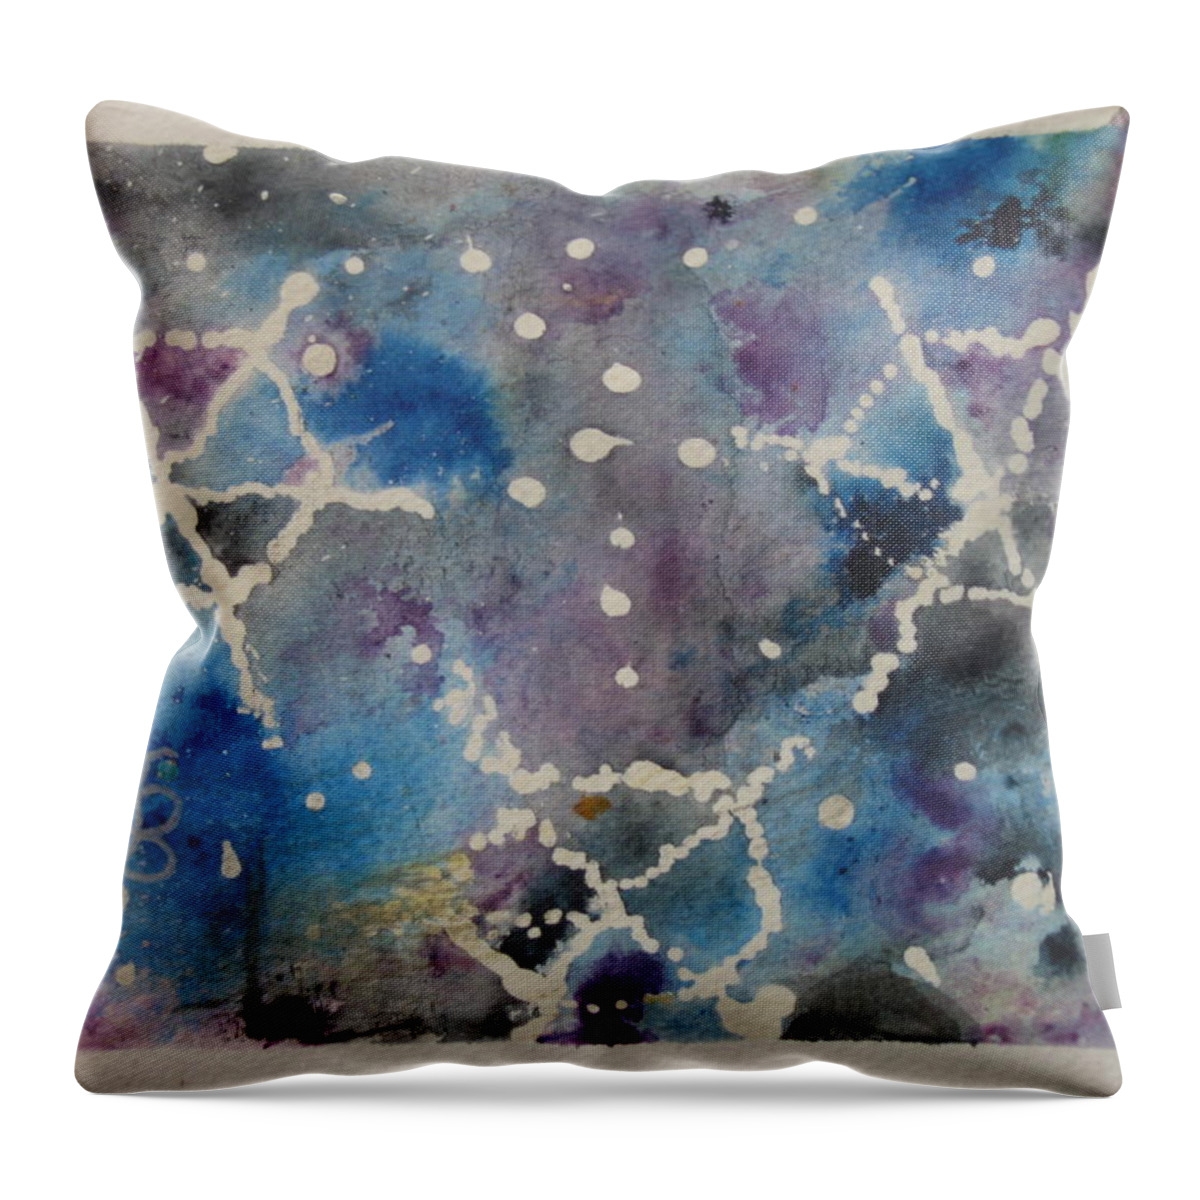  Throw Pillow featuring the drawing 102-1113 by AJ Brown